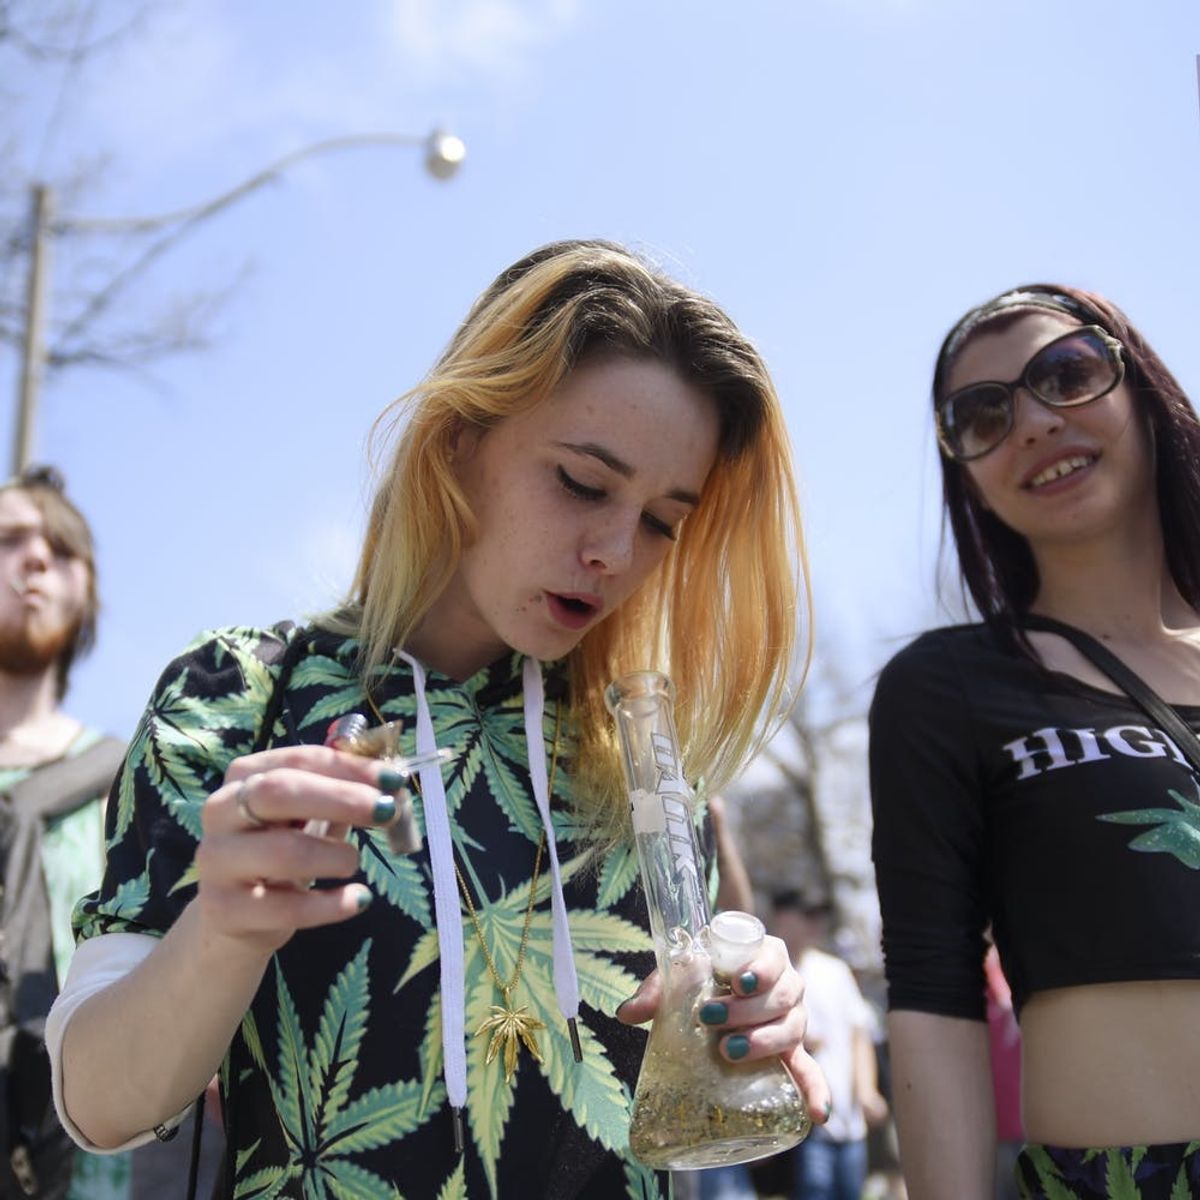 How Legalized Weed Is Changing the Way Schools Talk to Kids About Drugs